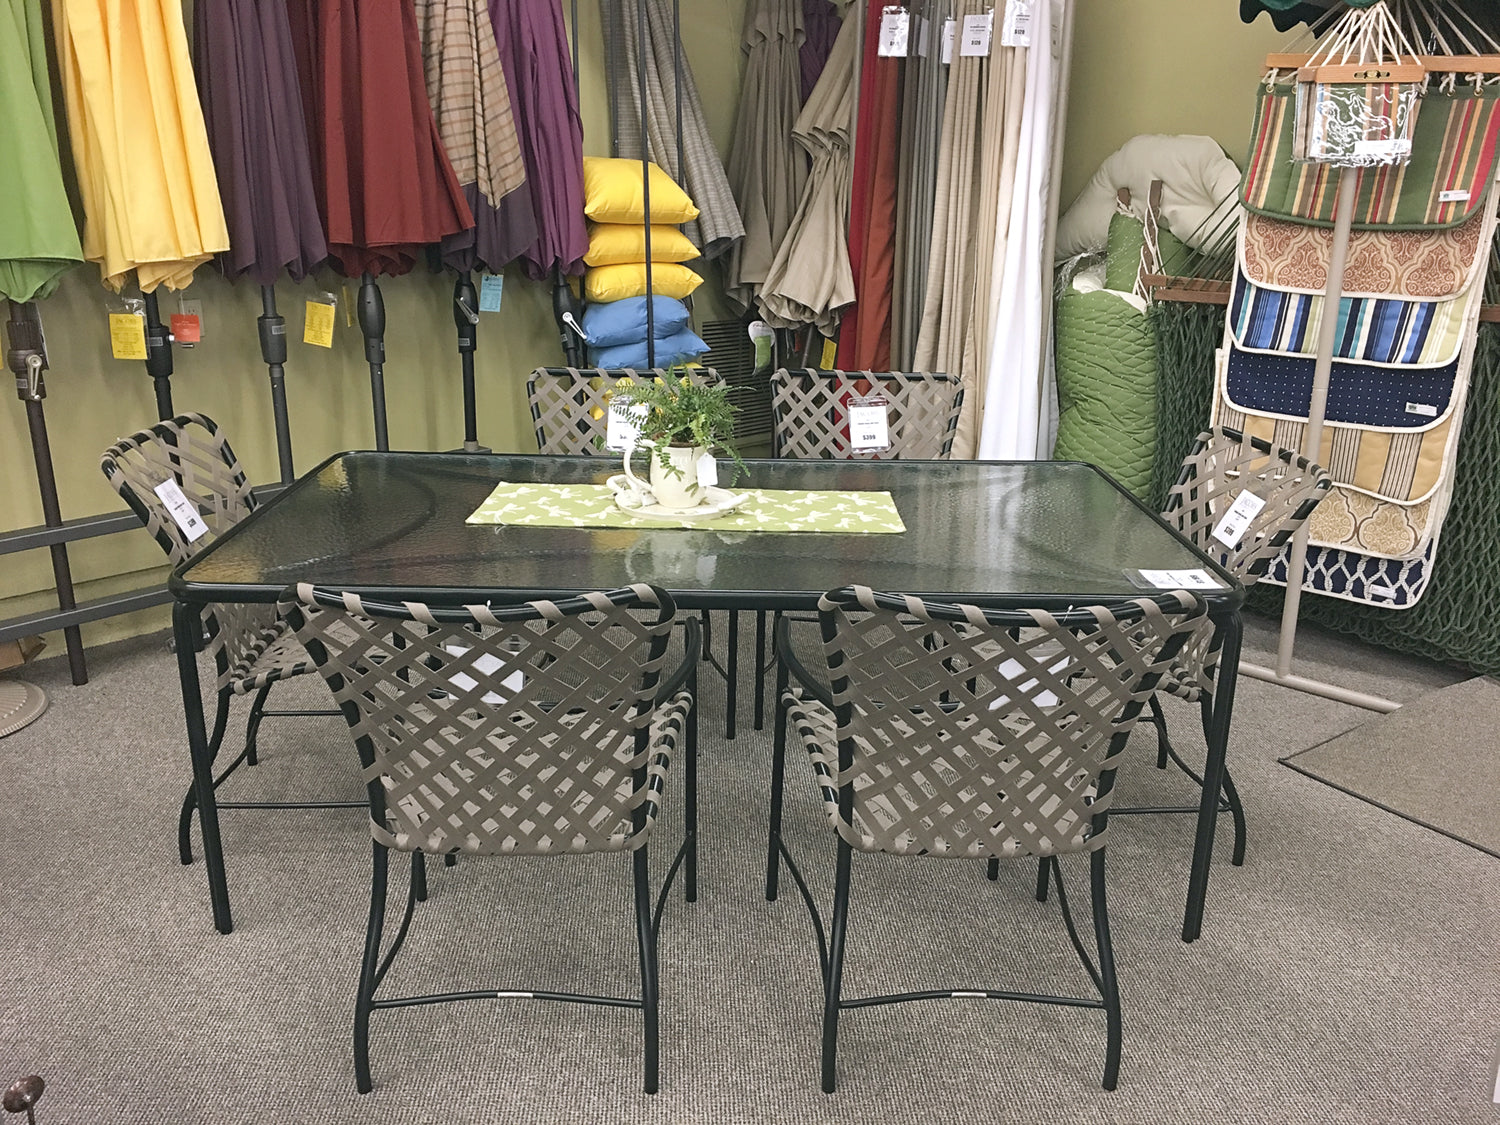 The Brown Jordan Tamiami 43"x77" Glass Top Dining Table is available in our Jacobs Custom Living Spokane Valley showroom.